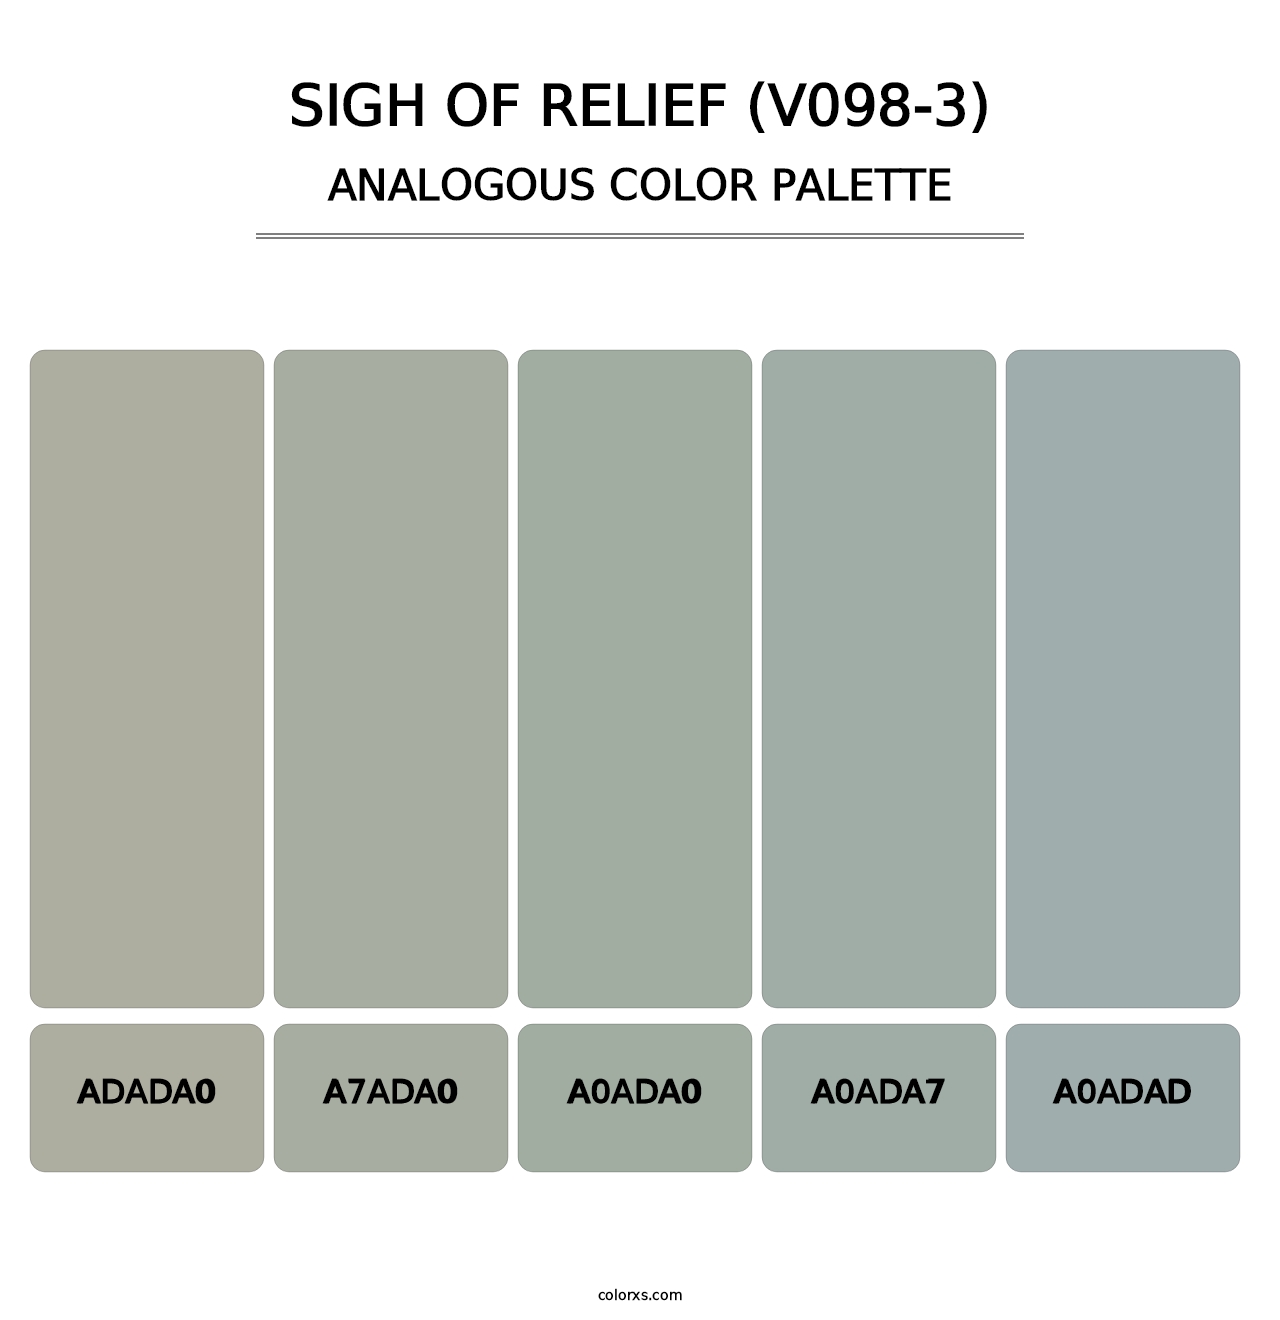 Sigh of Relief (V098-3) - Analogous Color Palette